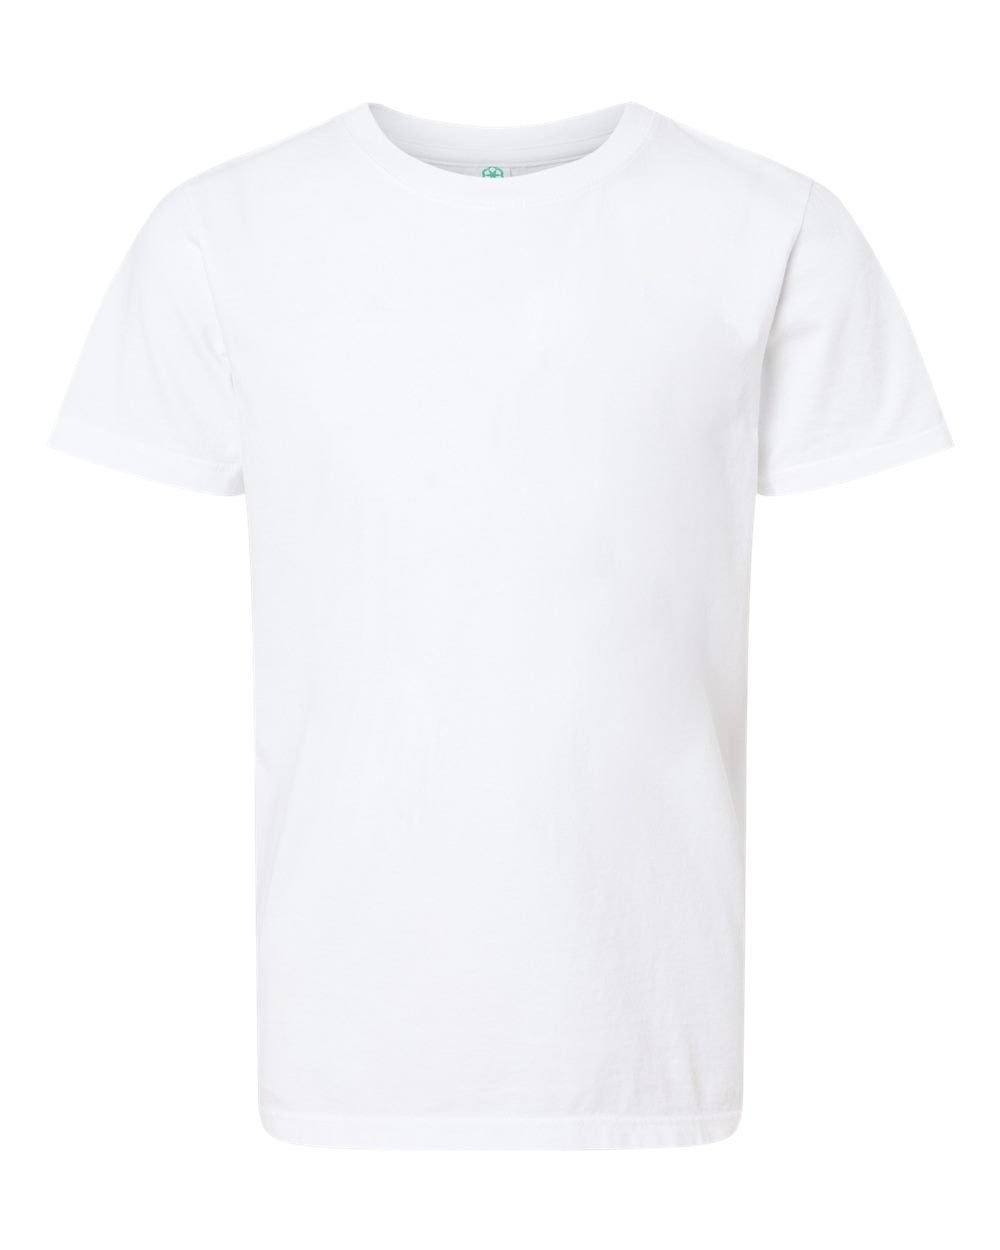 Softshirts® Youth Organic Cotton T-shirt in white